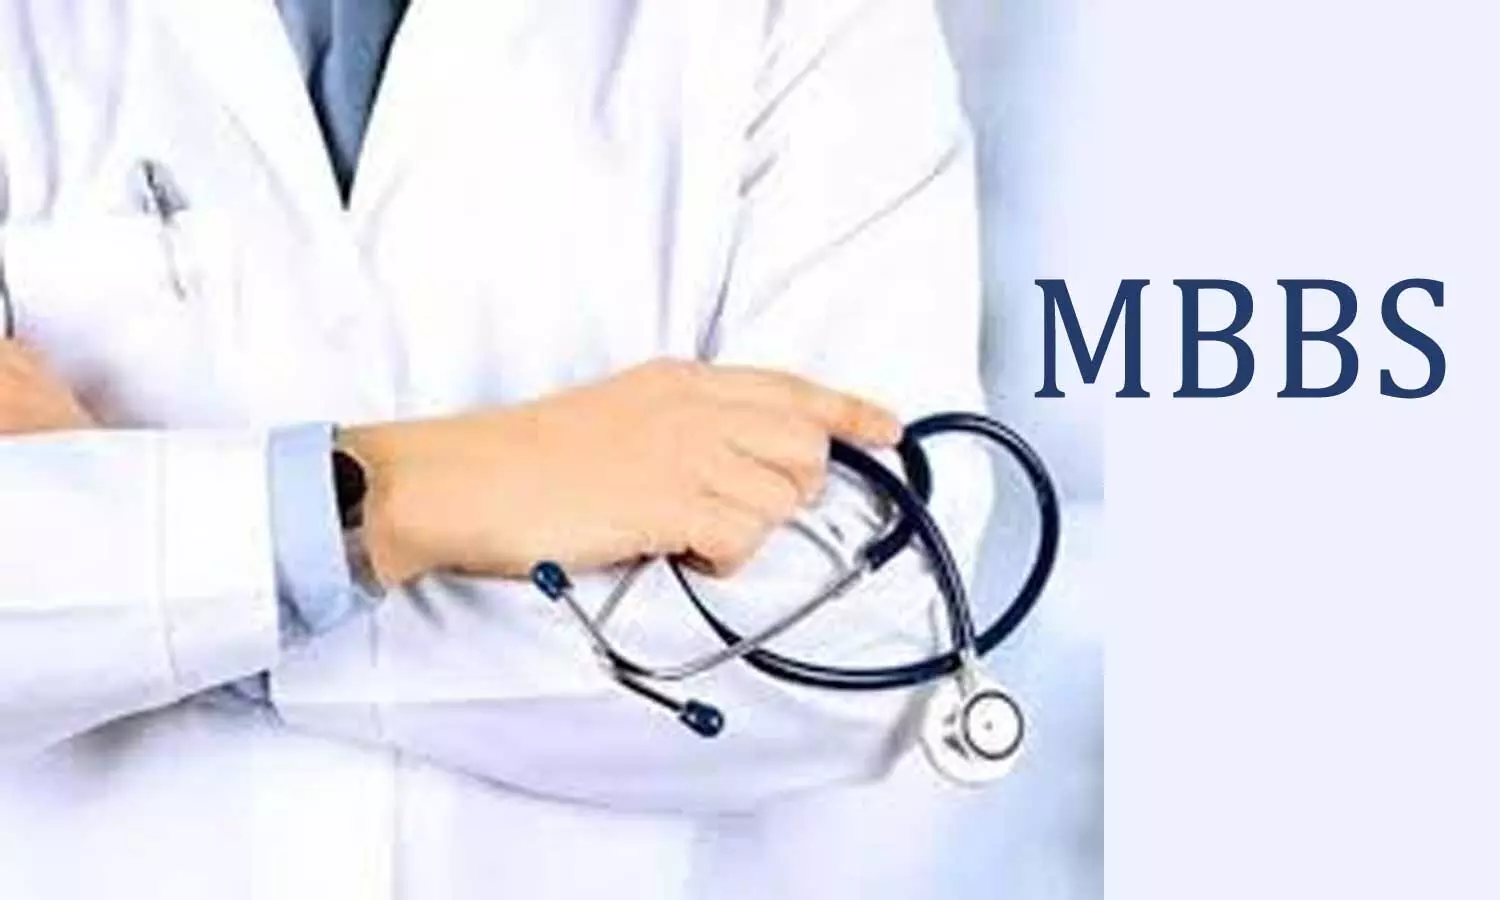 KGMU to give two mercy attempts to MBBS students unable to clear exams for last 8-27 years